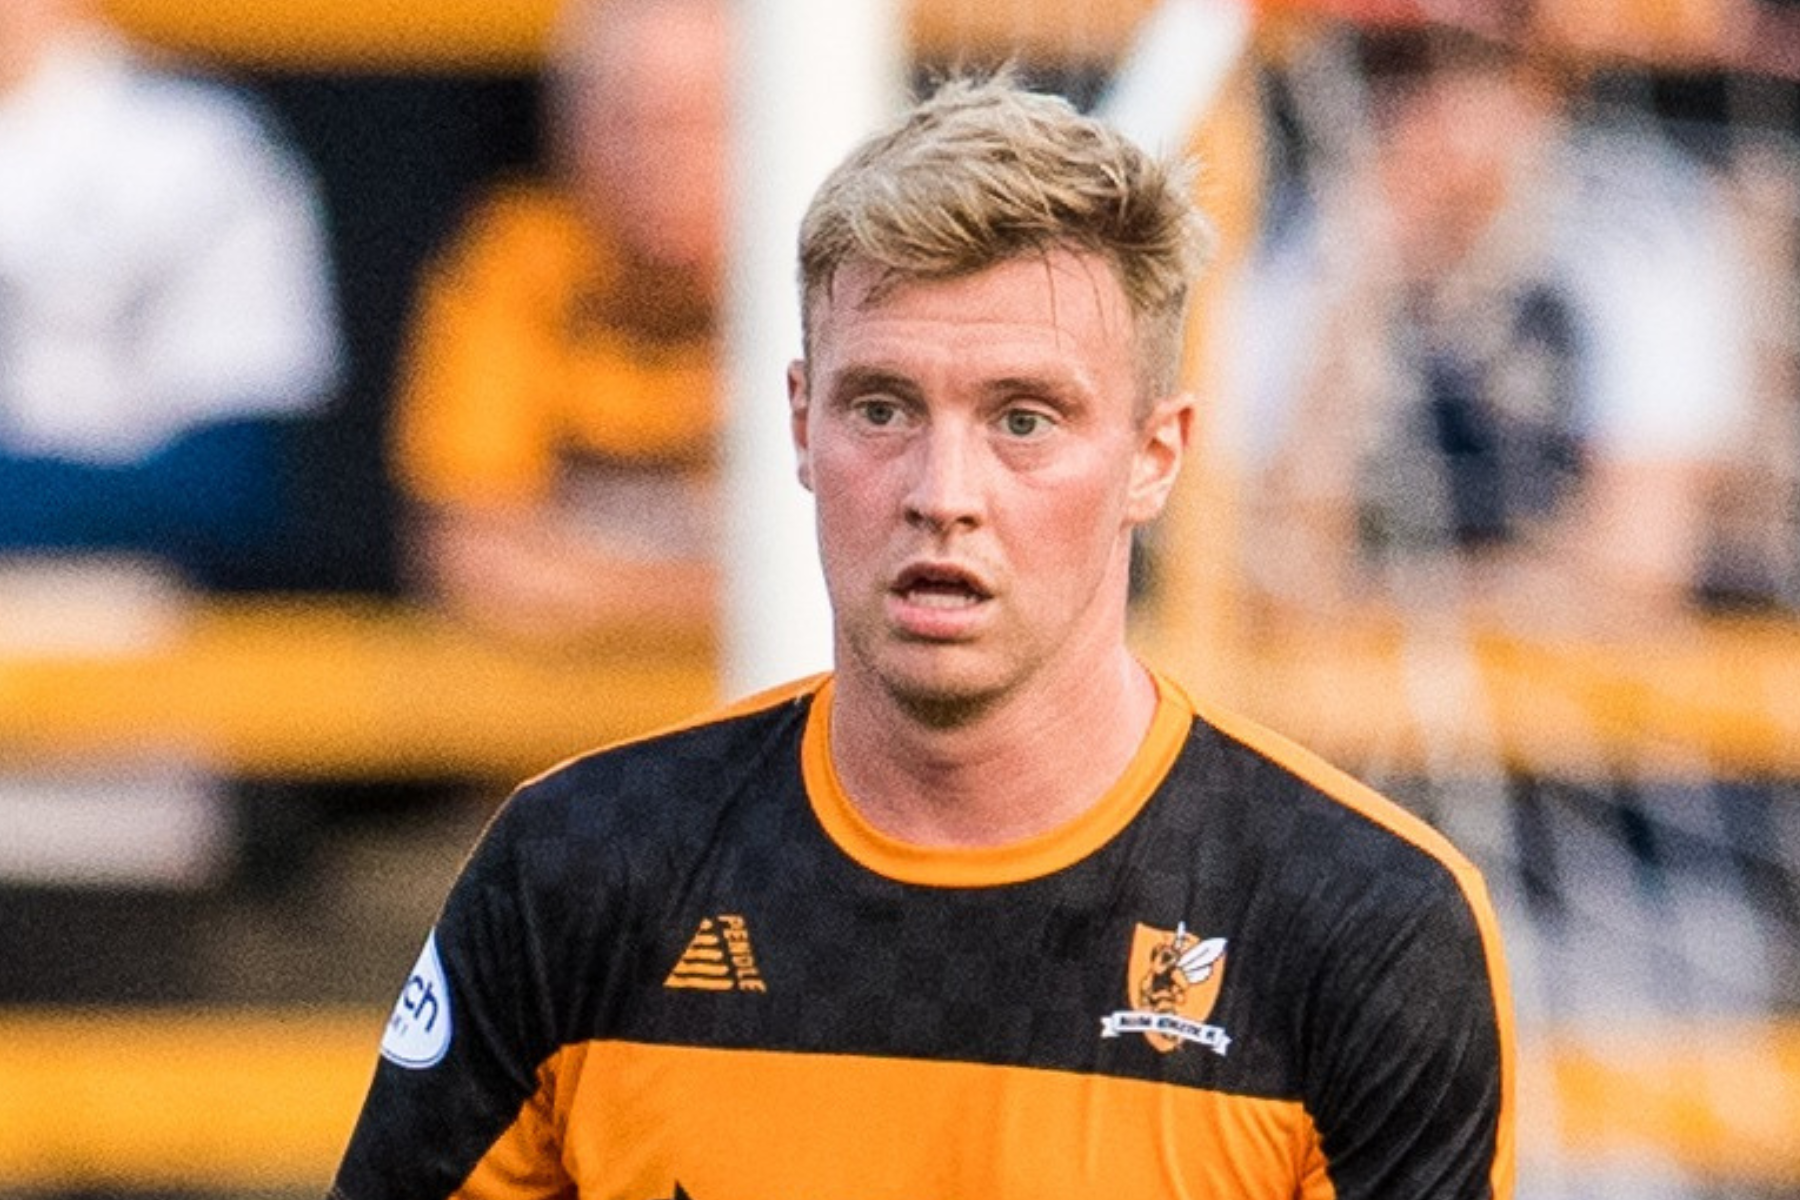 Adam King 'conscious and sitting up' after collapsing in Alloa game